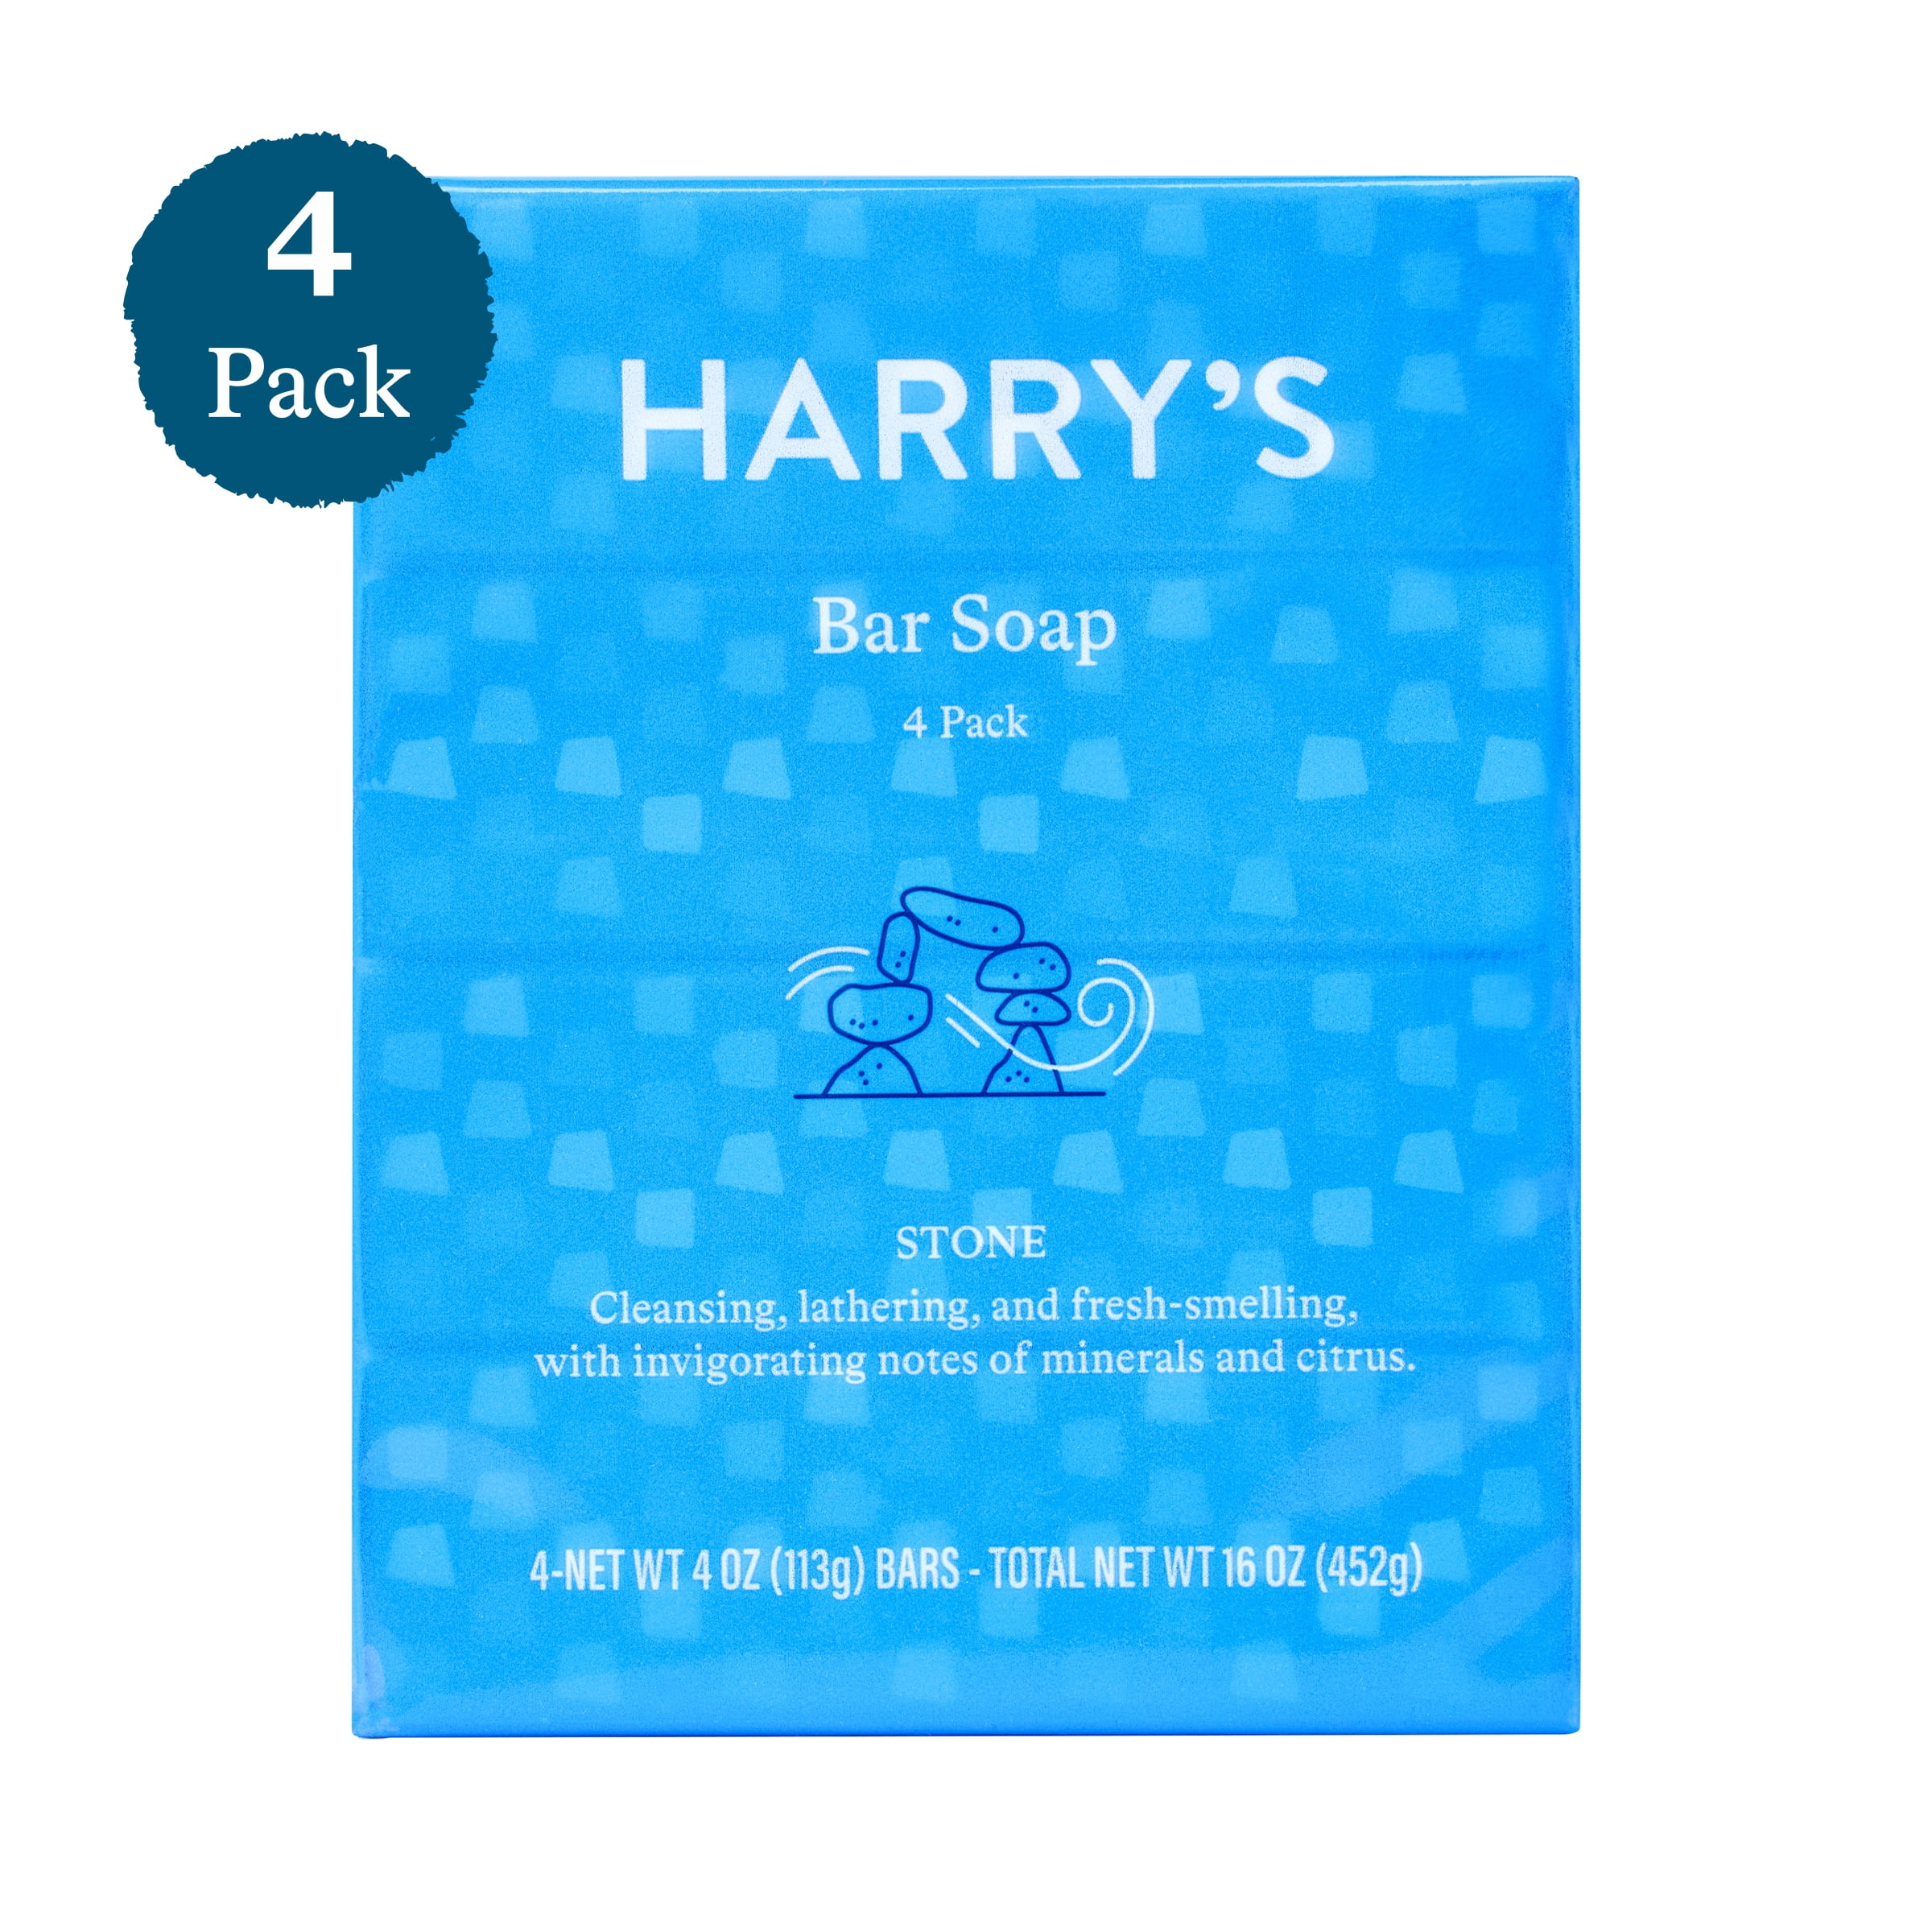 Harry's Men's Cleansing Bar Soap, Stone Scent, 4 oz, 4 Pack